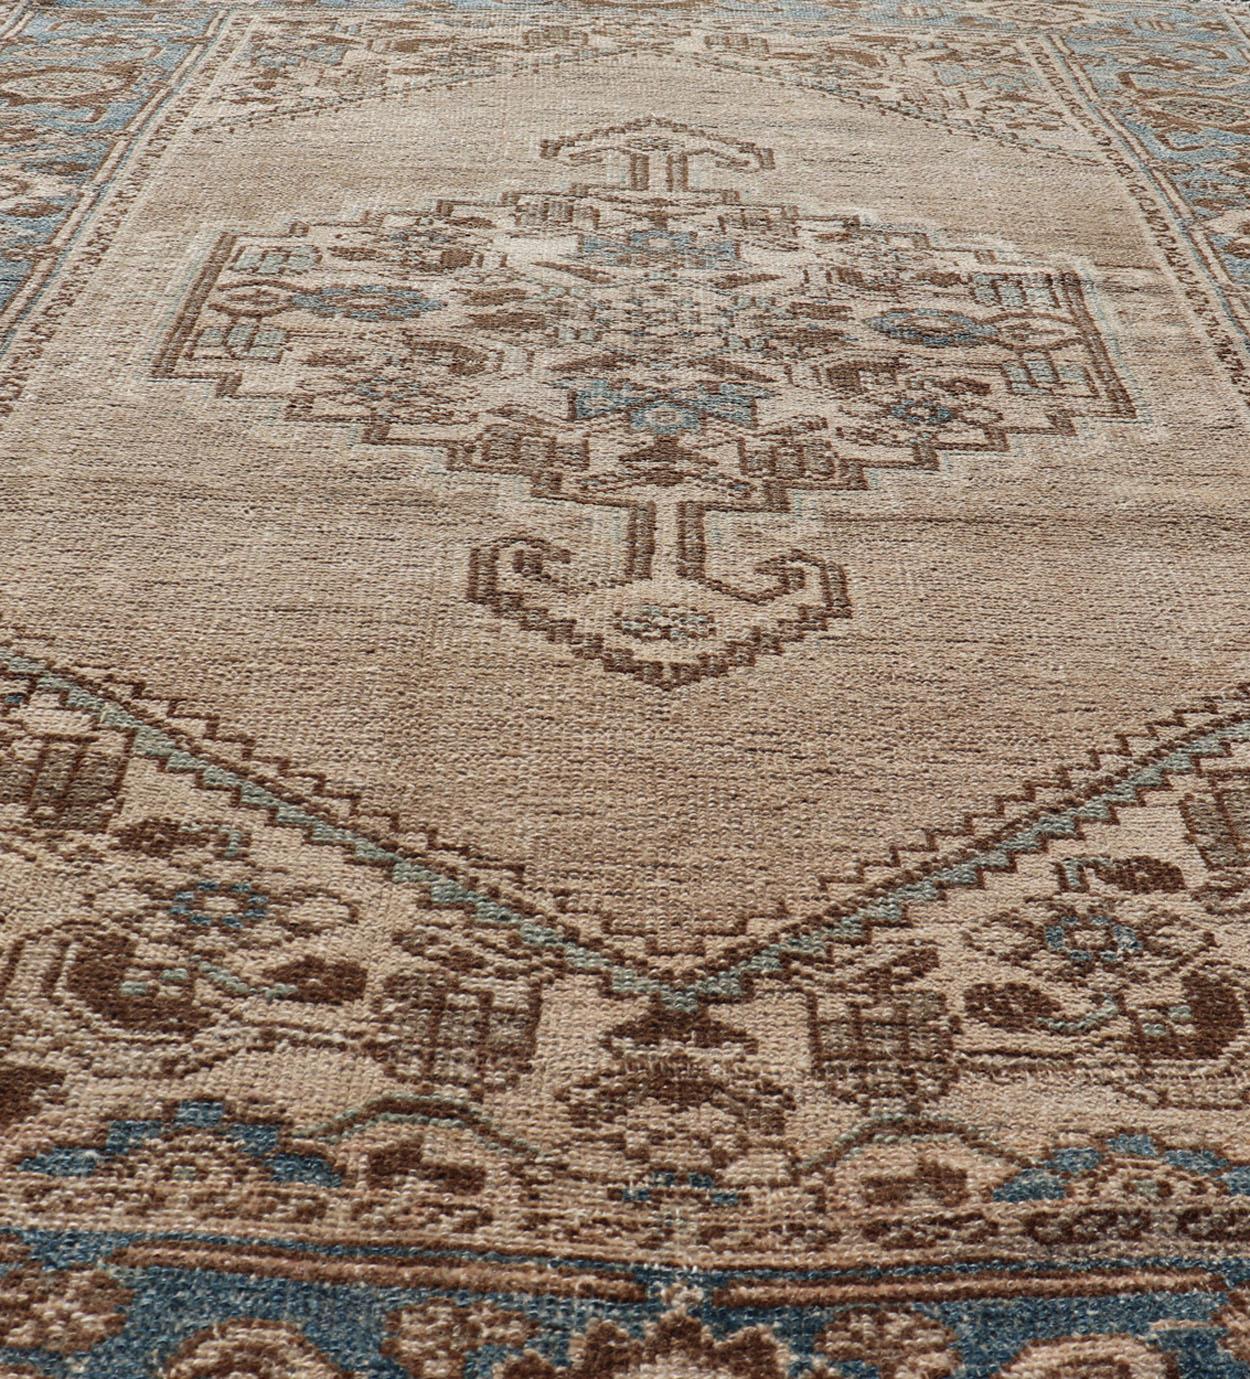 Malayer Antique Persian Hamadan Rug with Medallion Design in Tan, Light Blue & Brown For Sale